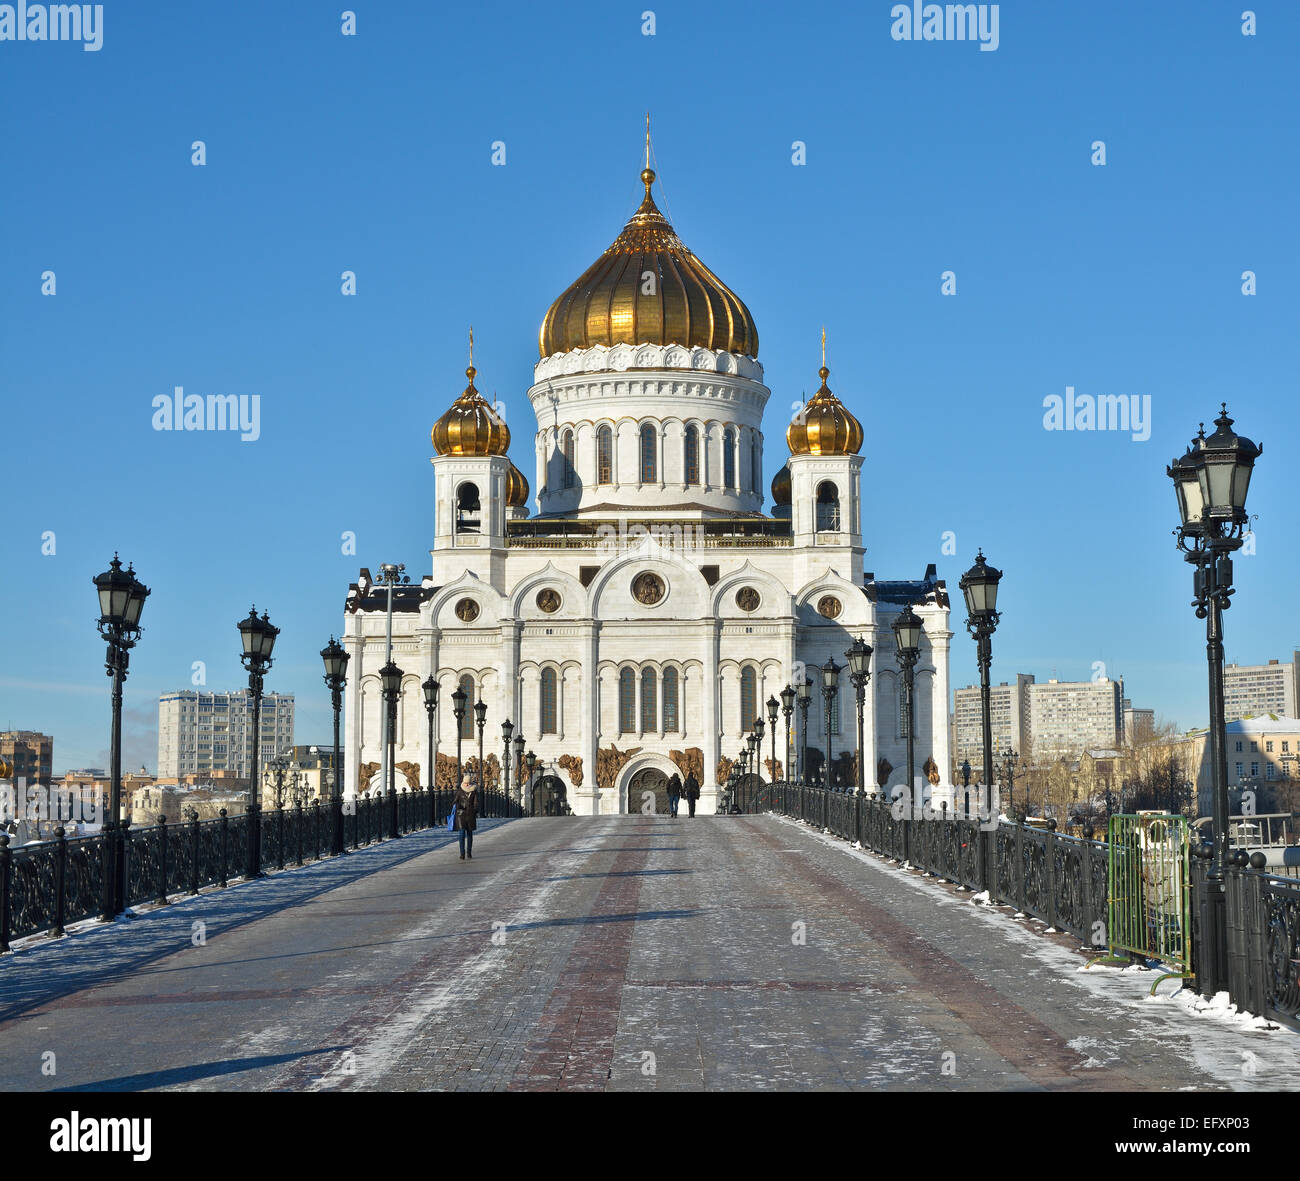 Moscow, Cathedral Of Christ The Savior. The Patriarchal bridge over the Moscow river. Stock Photo